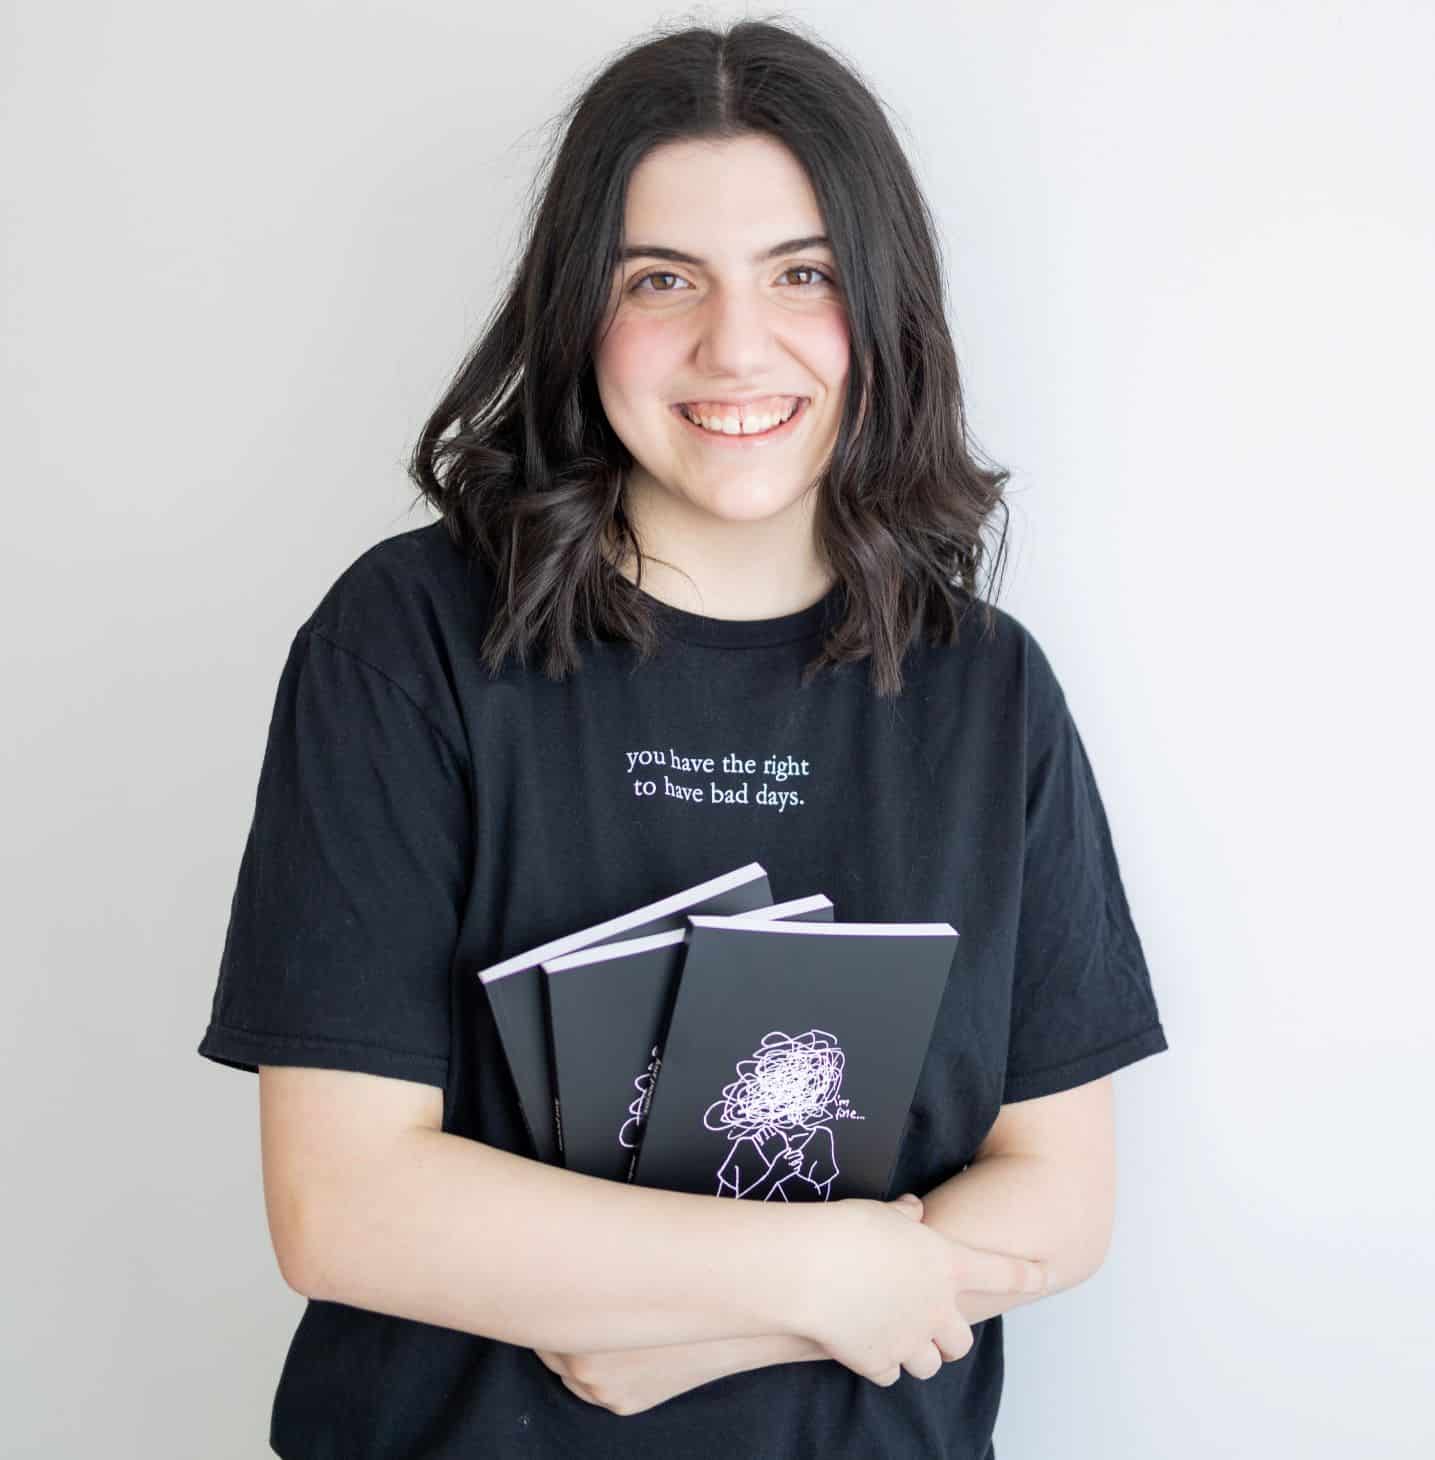 Embrun student publishes poetry book